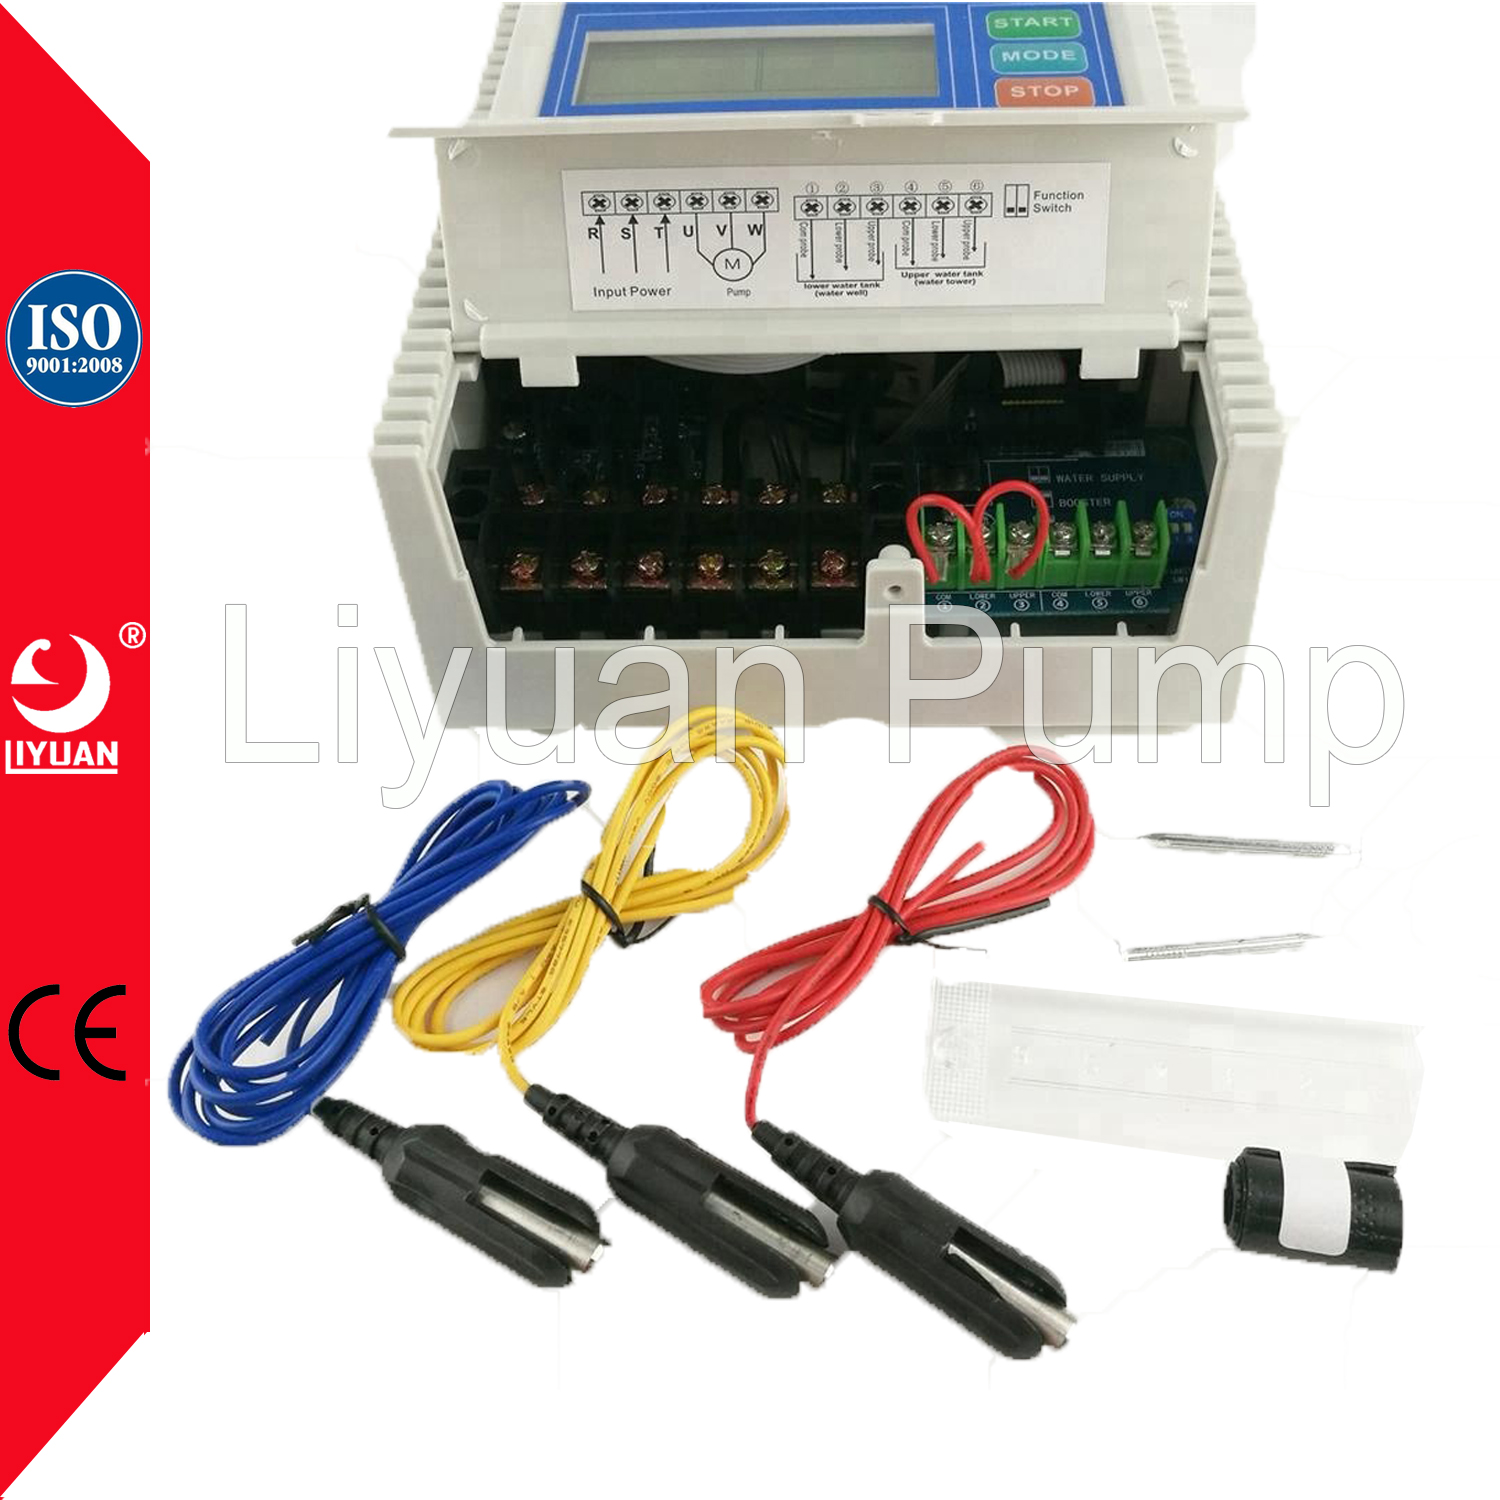 Electronic Pressure Control, Remote Control Switch